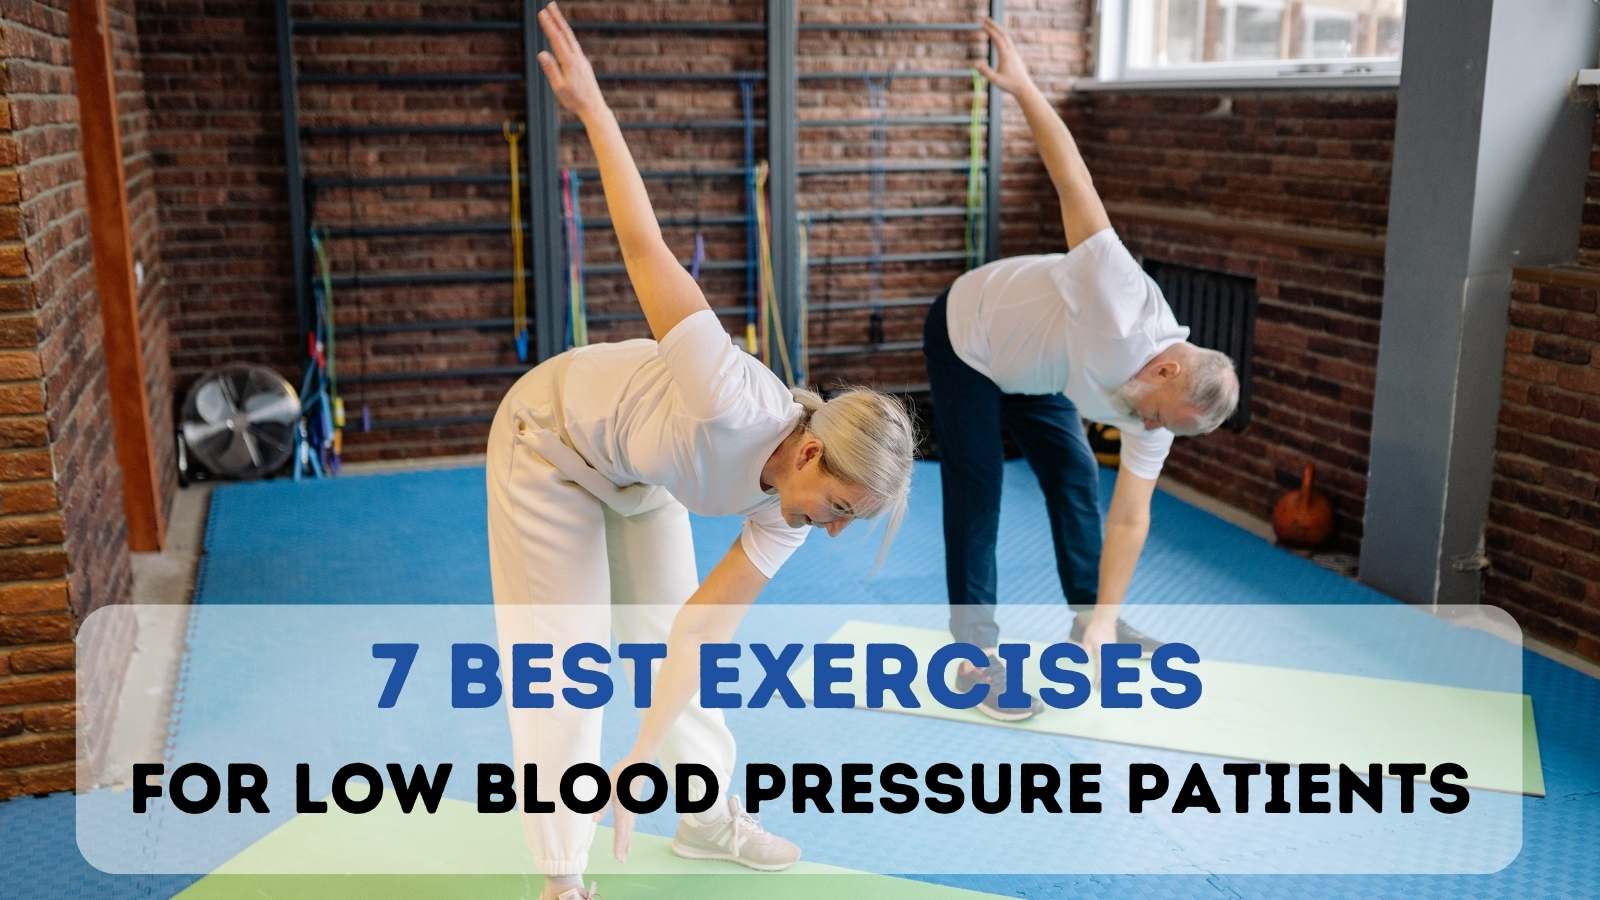 High blood pressure treatment: 3 powerful yoga poses and asanas to control  high BP and get a flat stomach | Health Tips and News